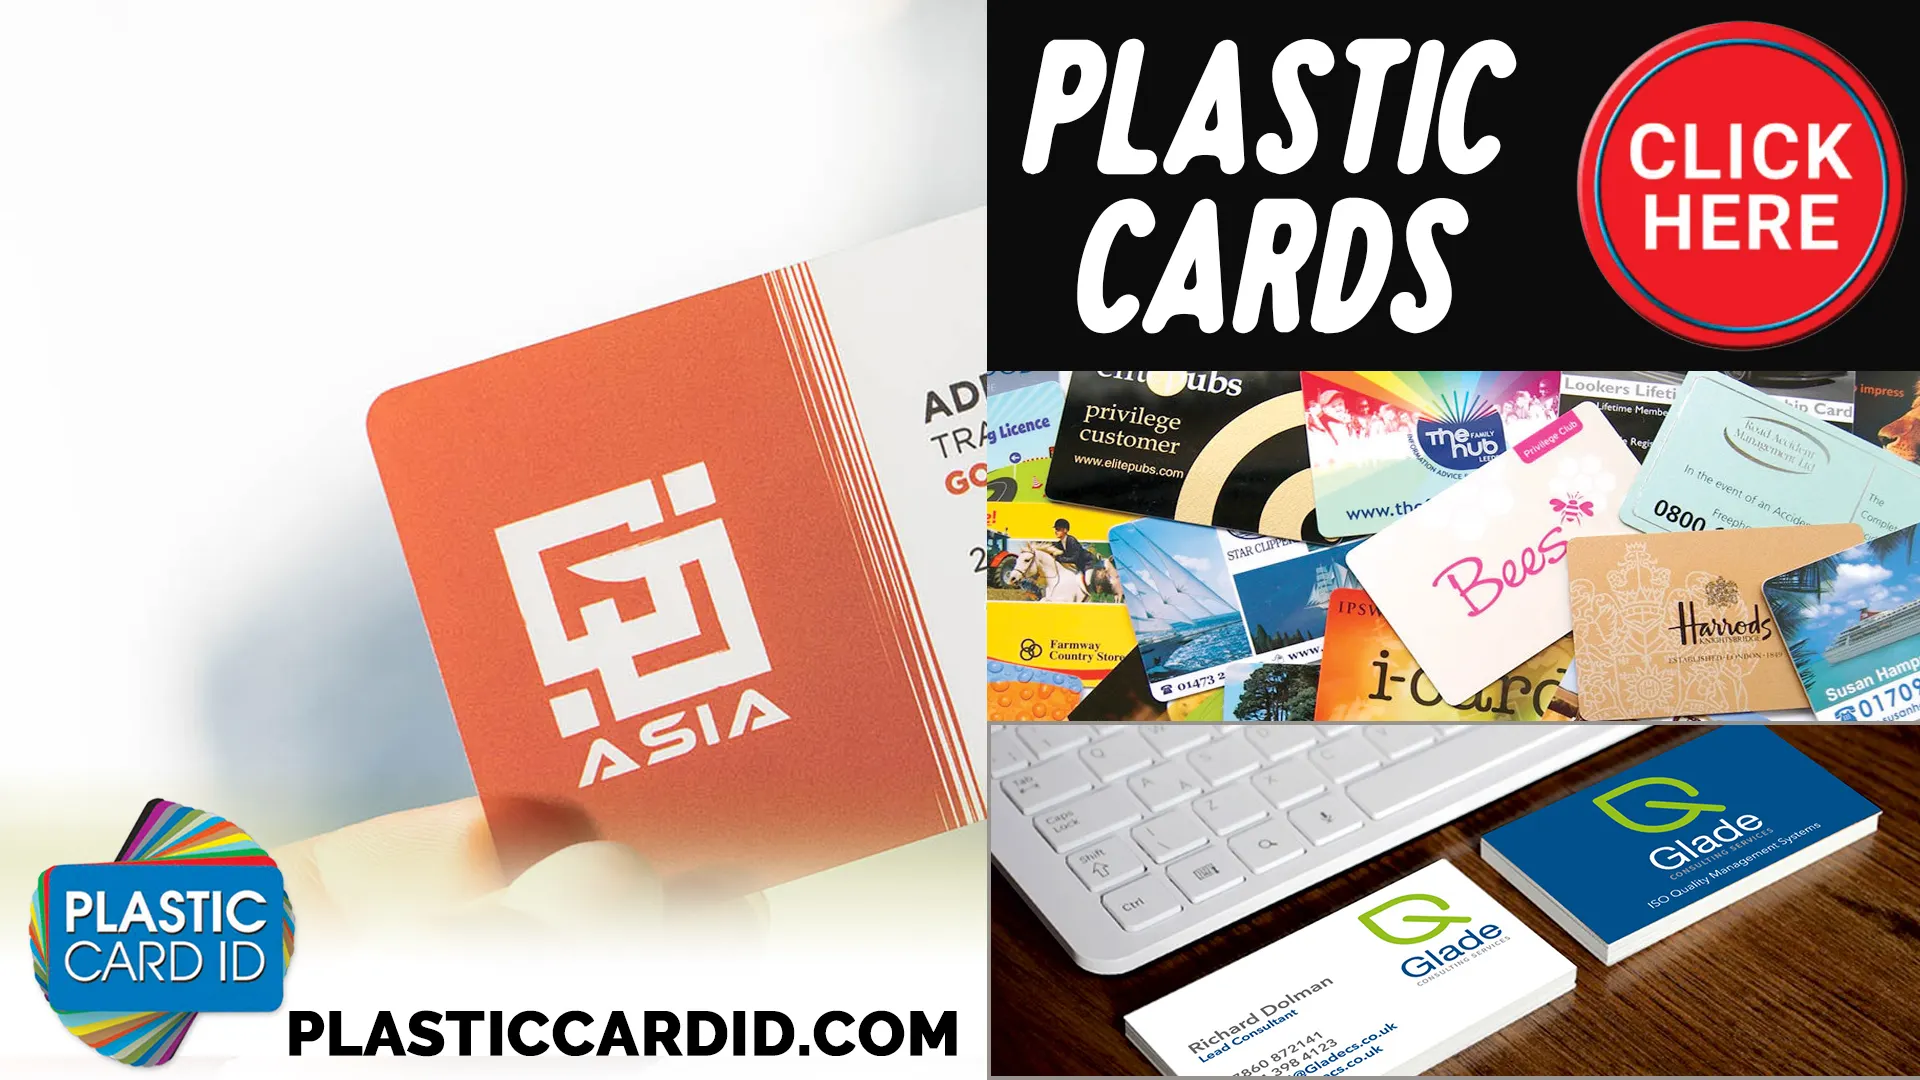 Dependable Delivery: Getting Your Plastic Cards Where They Need to Be